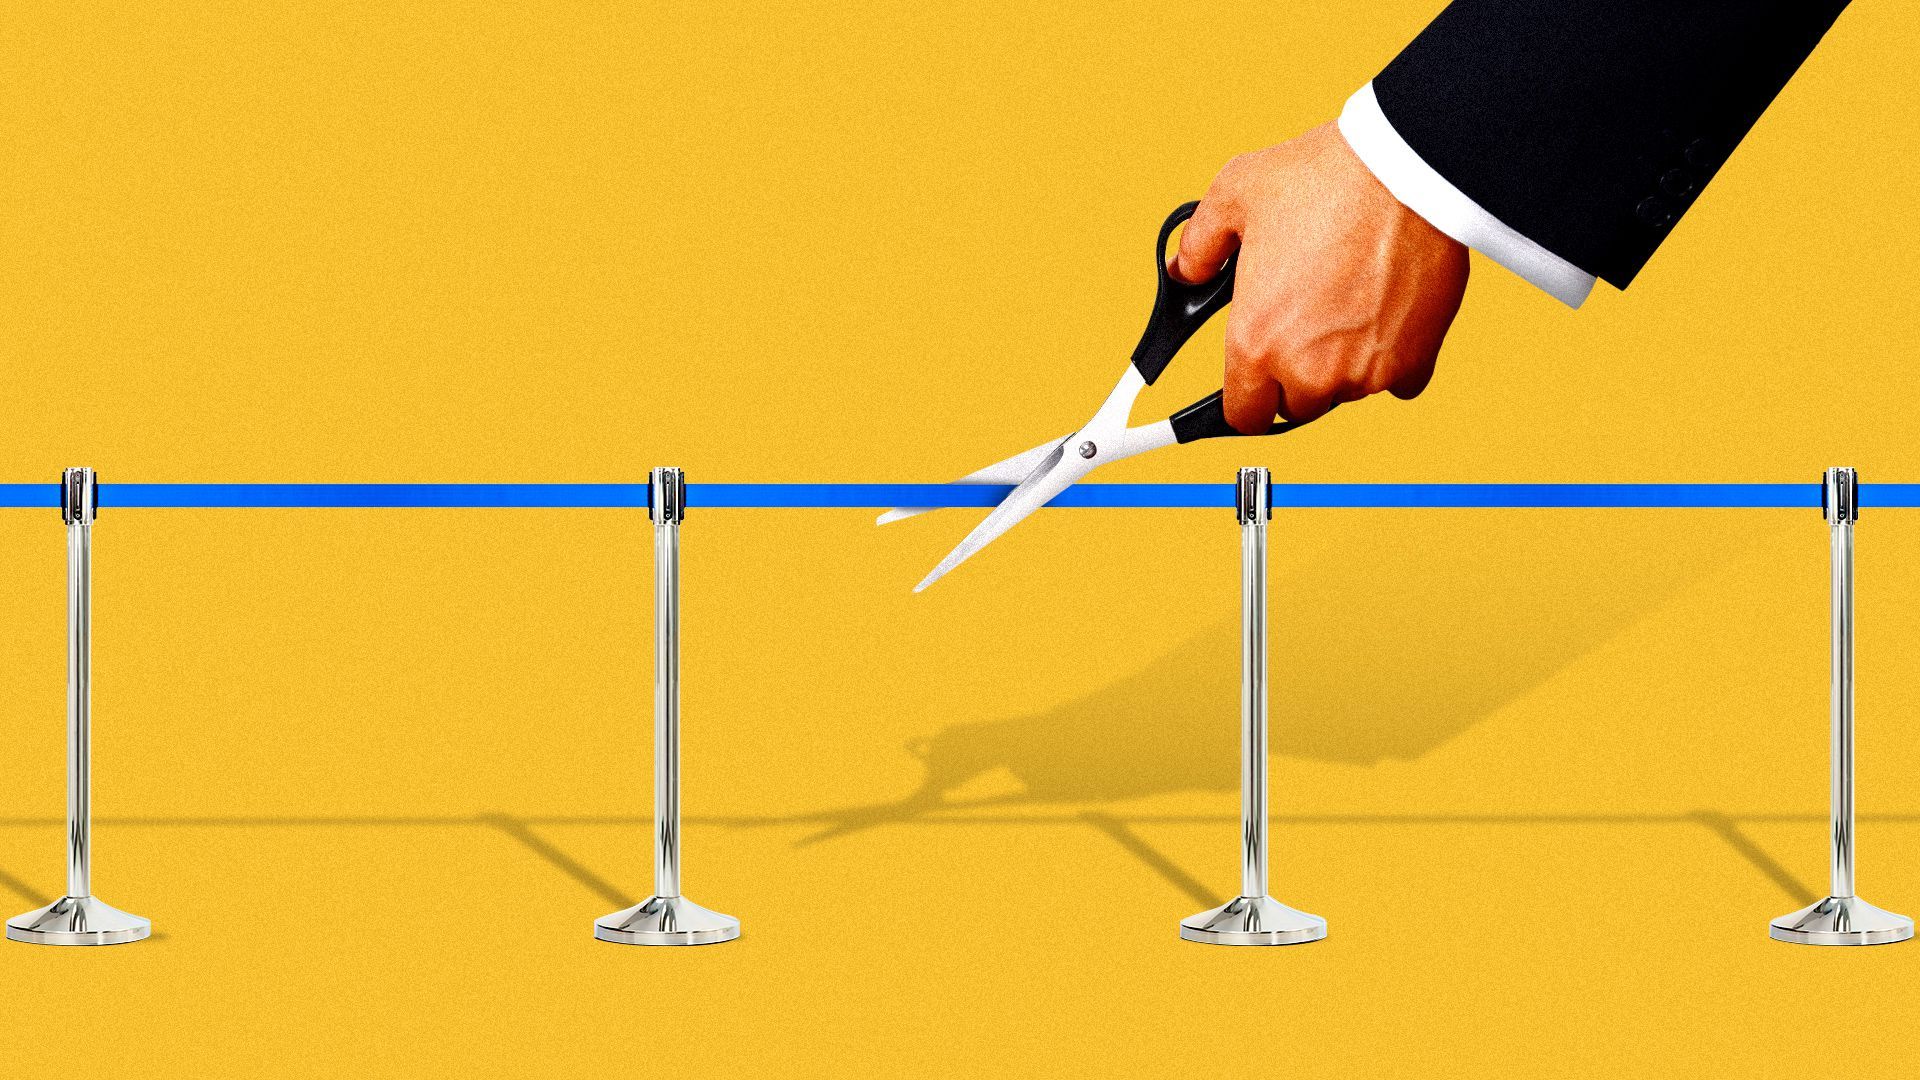 Illustration of a hand cutting a crowd control roped queue line. 